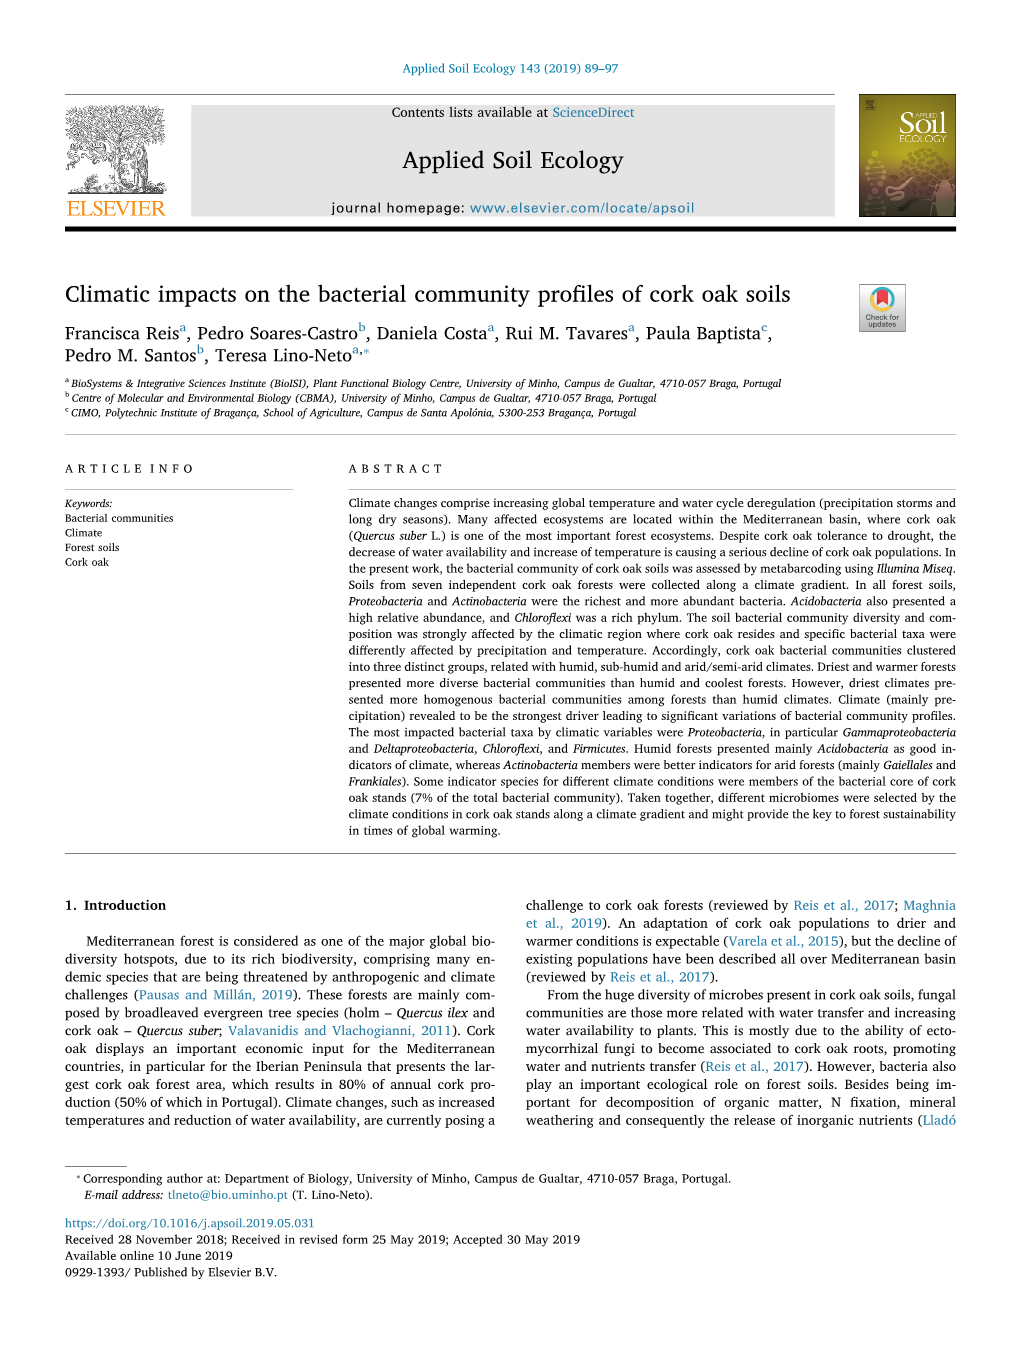 Climatic Impacts on the Bacterial Community Profiles of Cork Oak Soils